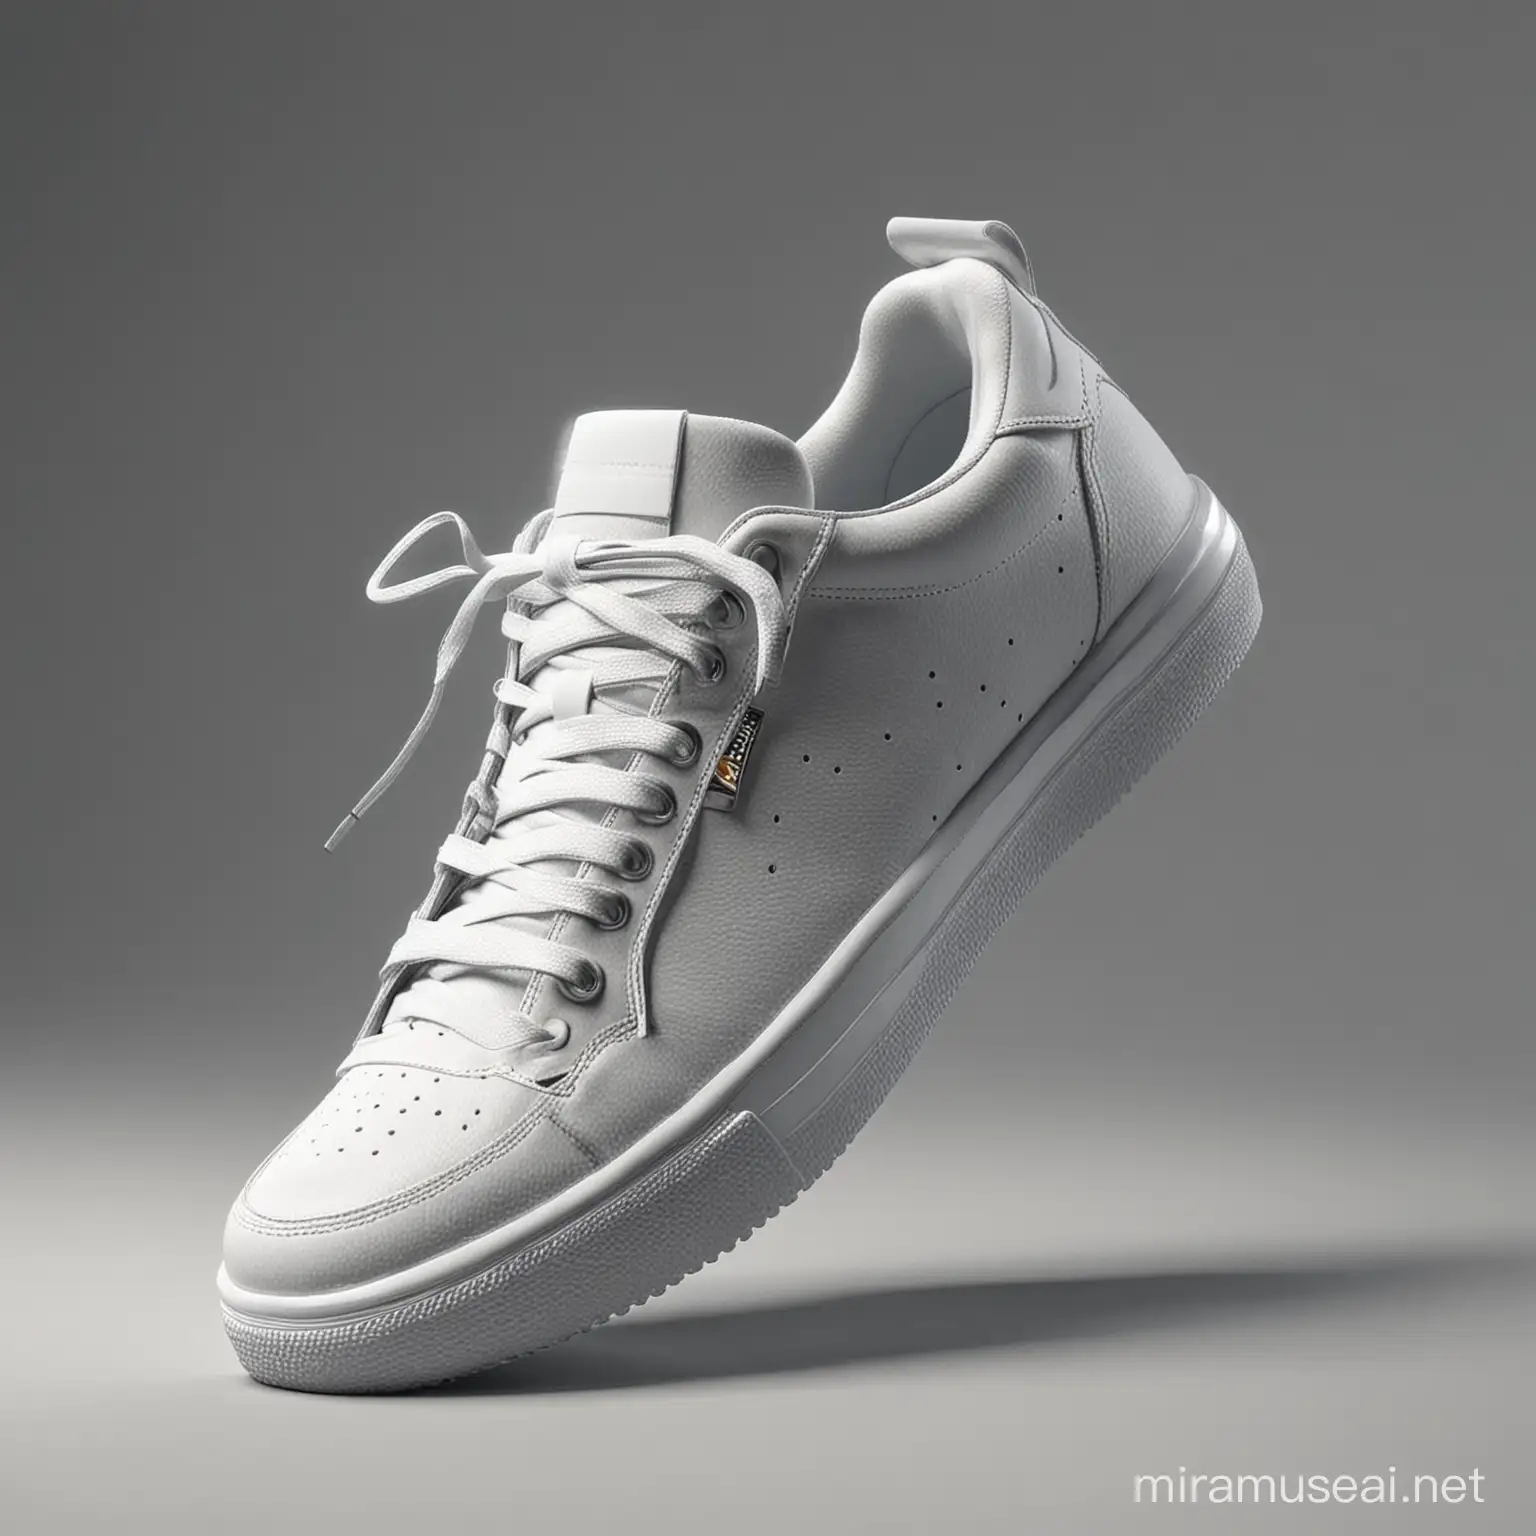 3D Photo realistic sneakers shoe render, 4k quality without image deforming and no quality less only high quality.